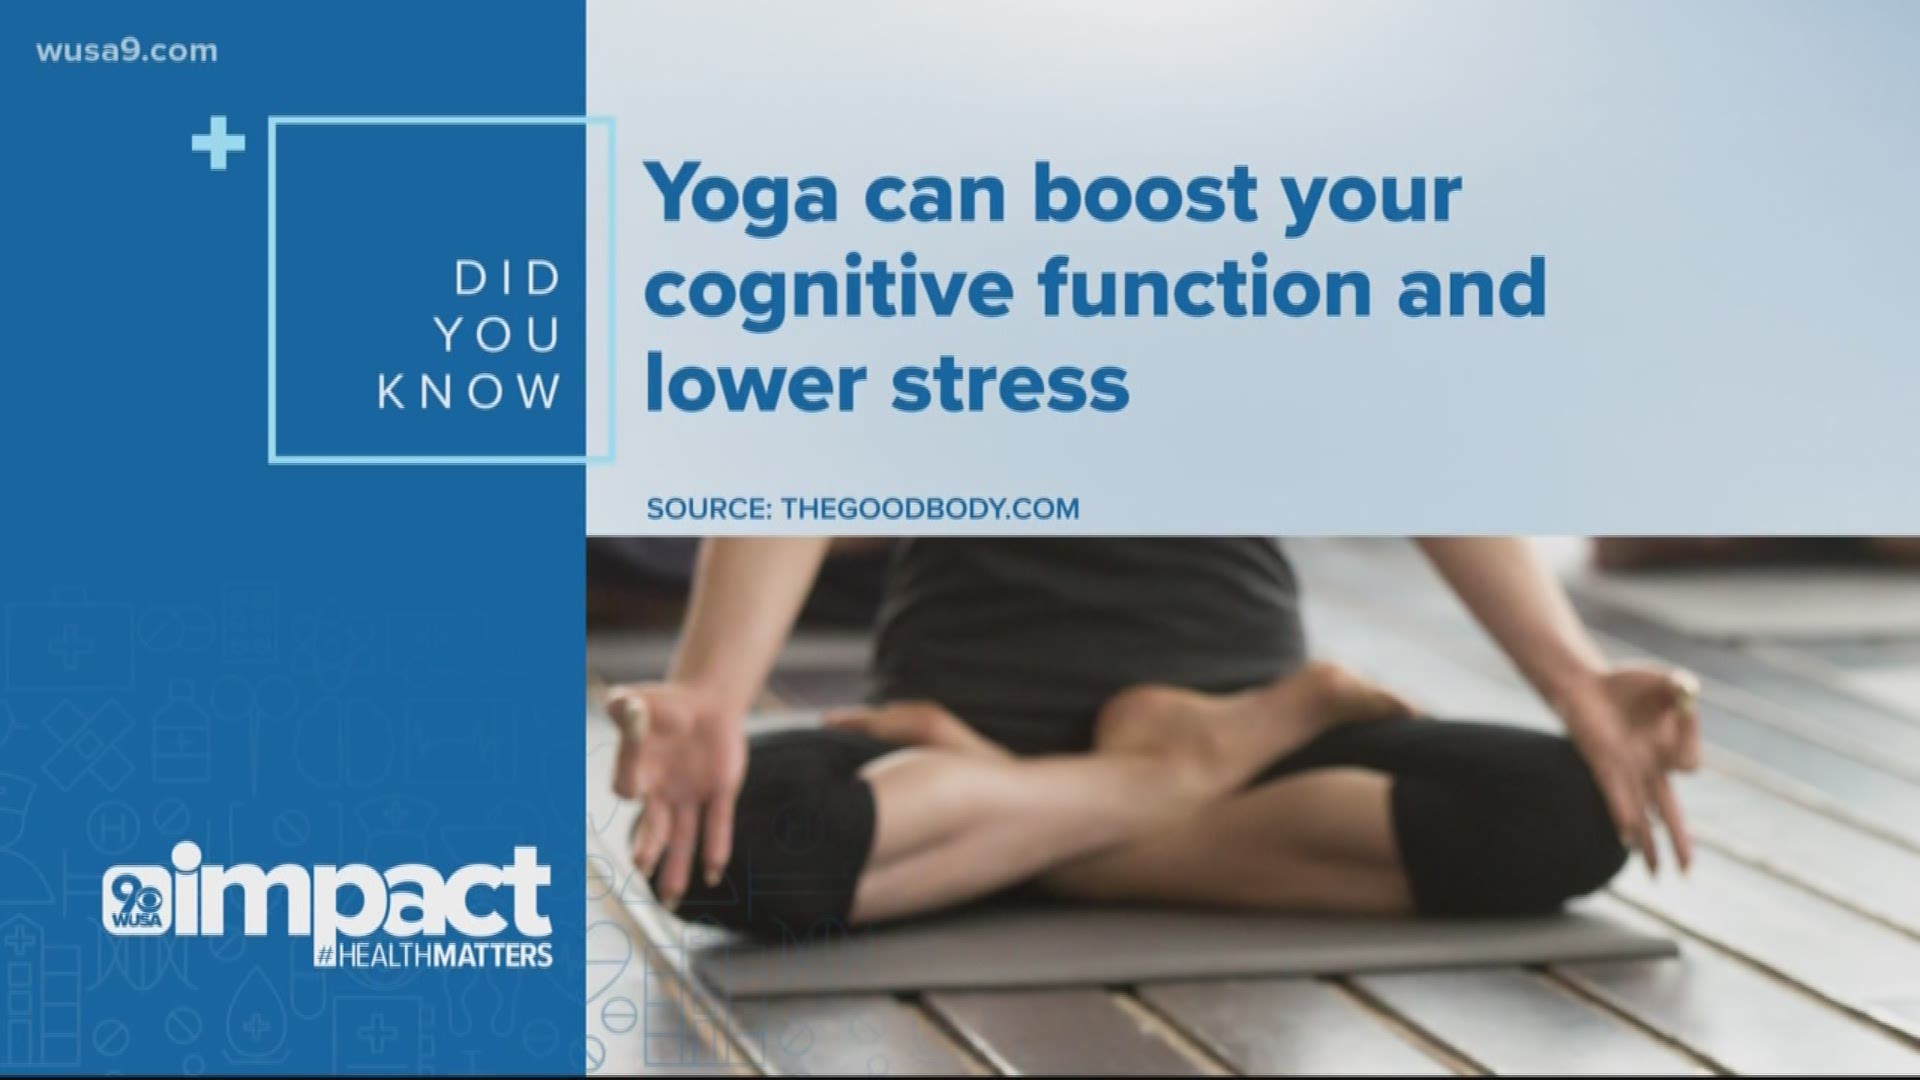 A study in the Journal of Physical Activity and Health found yoga helped respondents better maintain their focus and absorb new information.